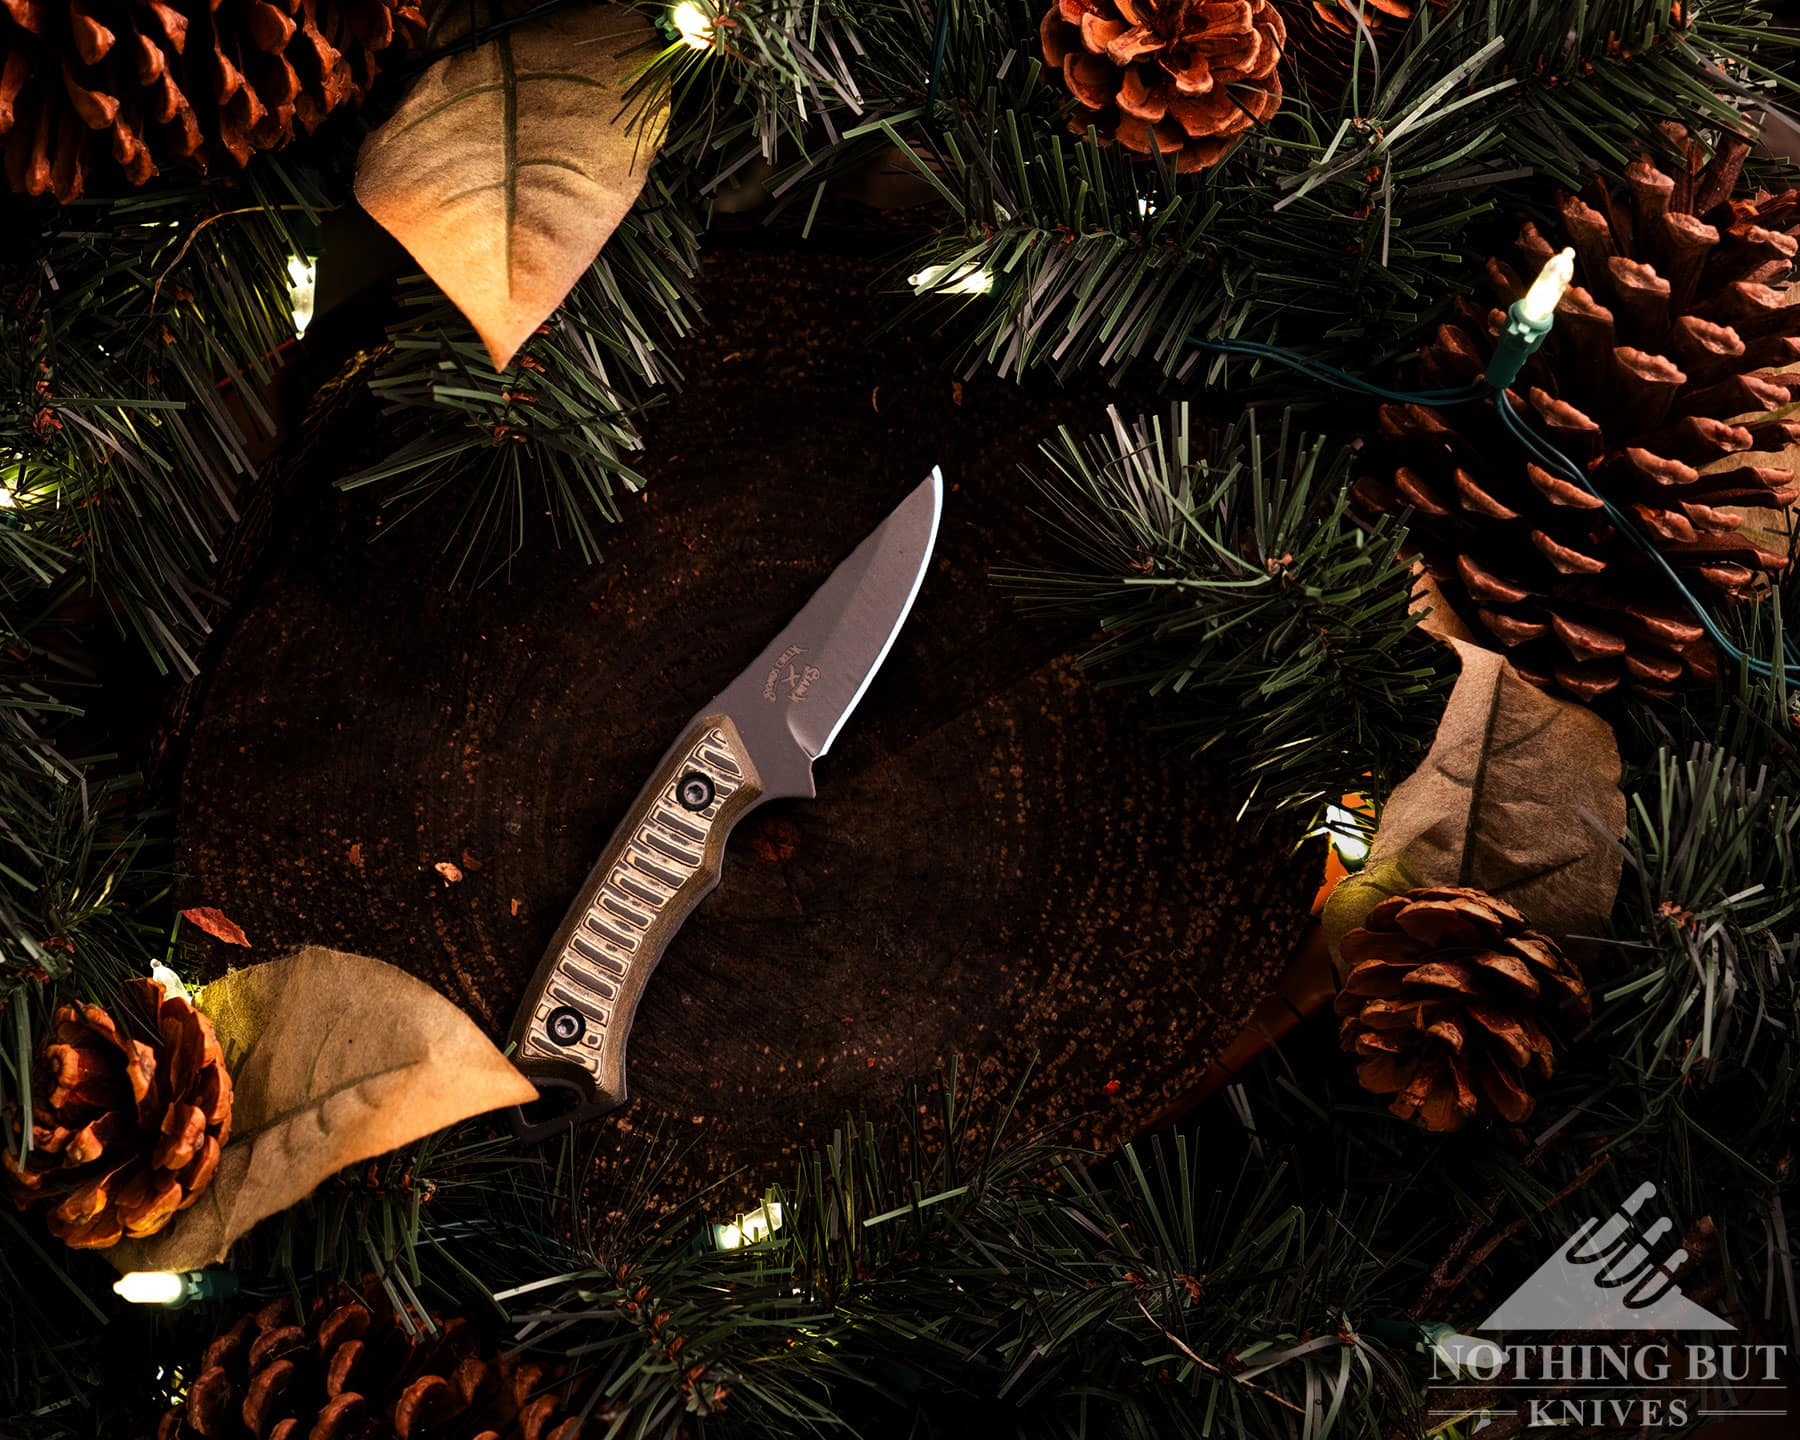 The Bonds Creek Badger is a good example of a practical camping fixed blade. 